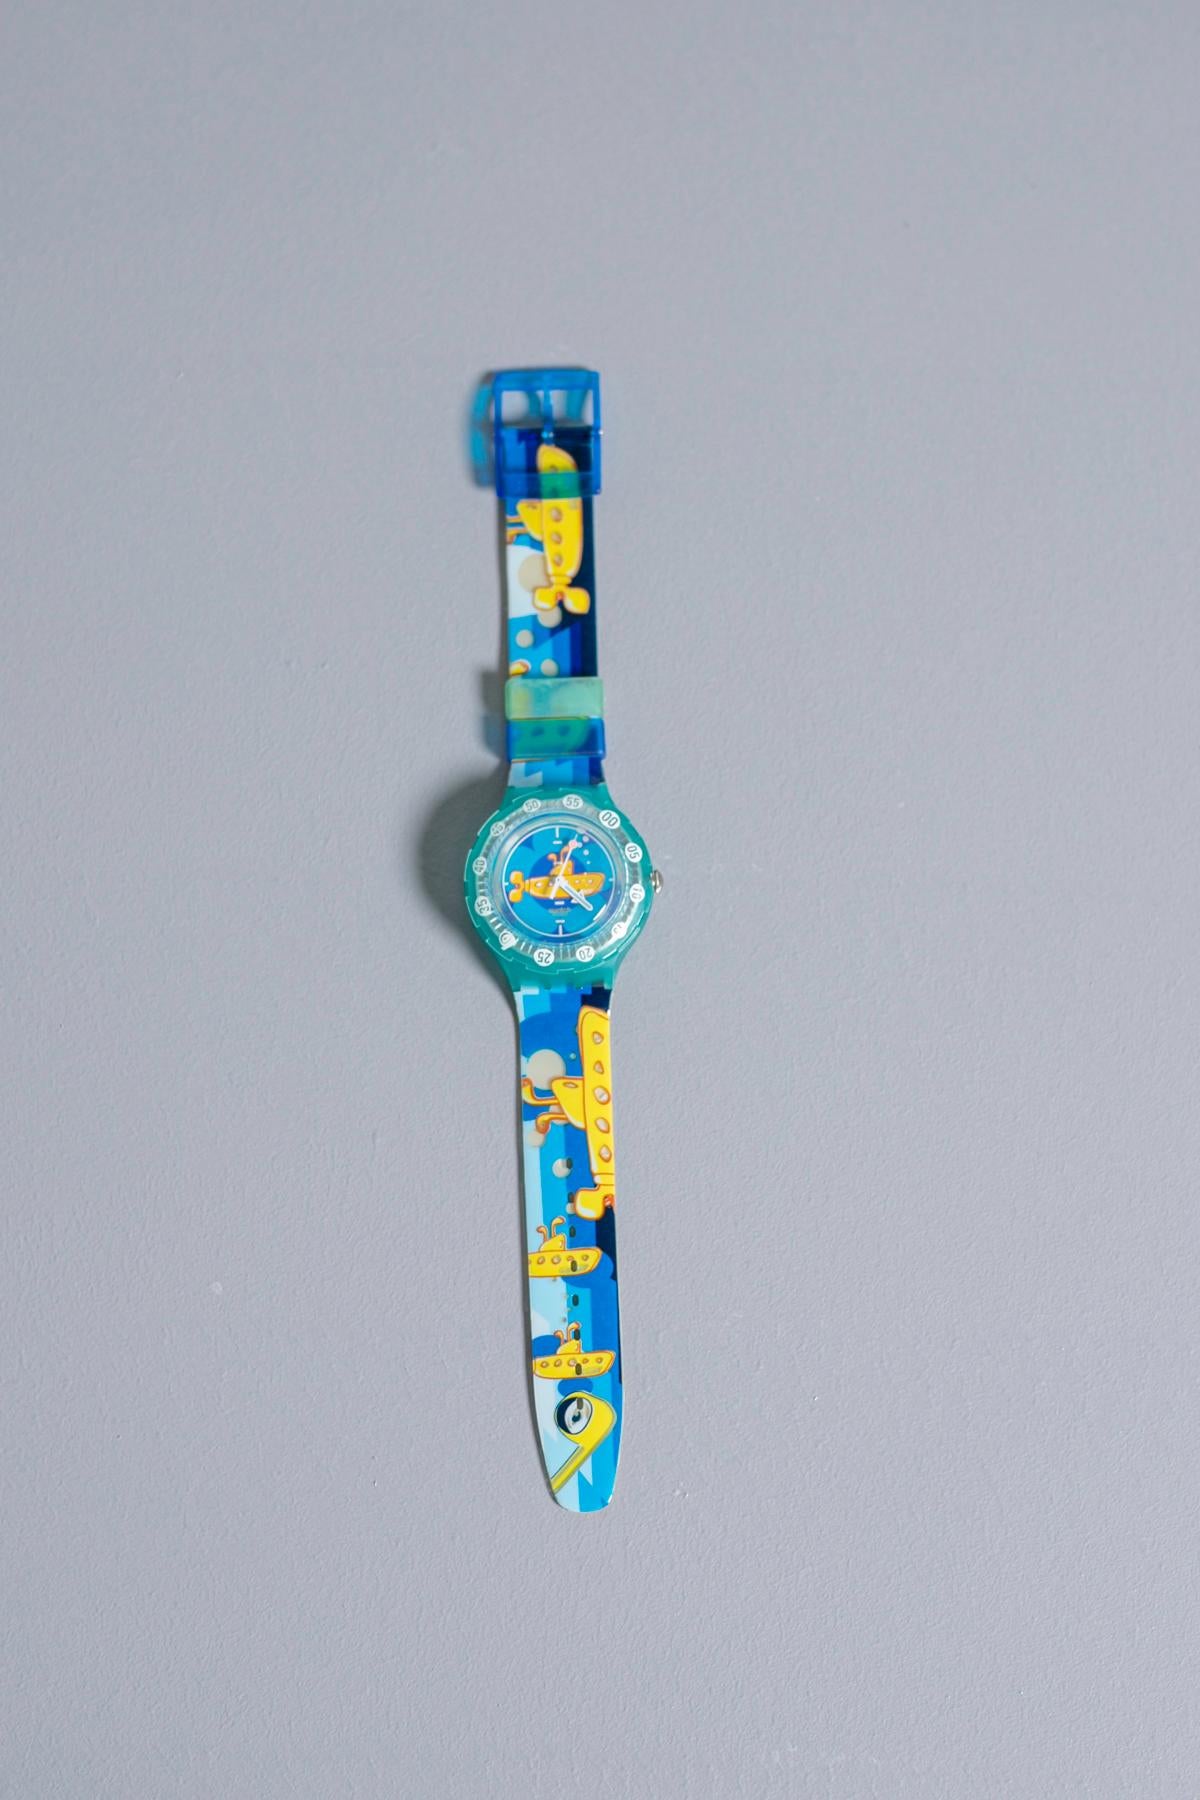 Beautiful vintage Swatch dedicated to fans of the legendary Abbey Road band: the Beatles. The iconic yellow submarine is drawn along the strap, making this collector's item even more special is the packaging: an inflatable yellow submarine.

Case